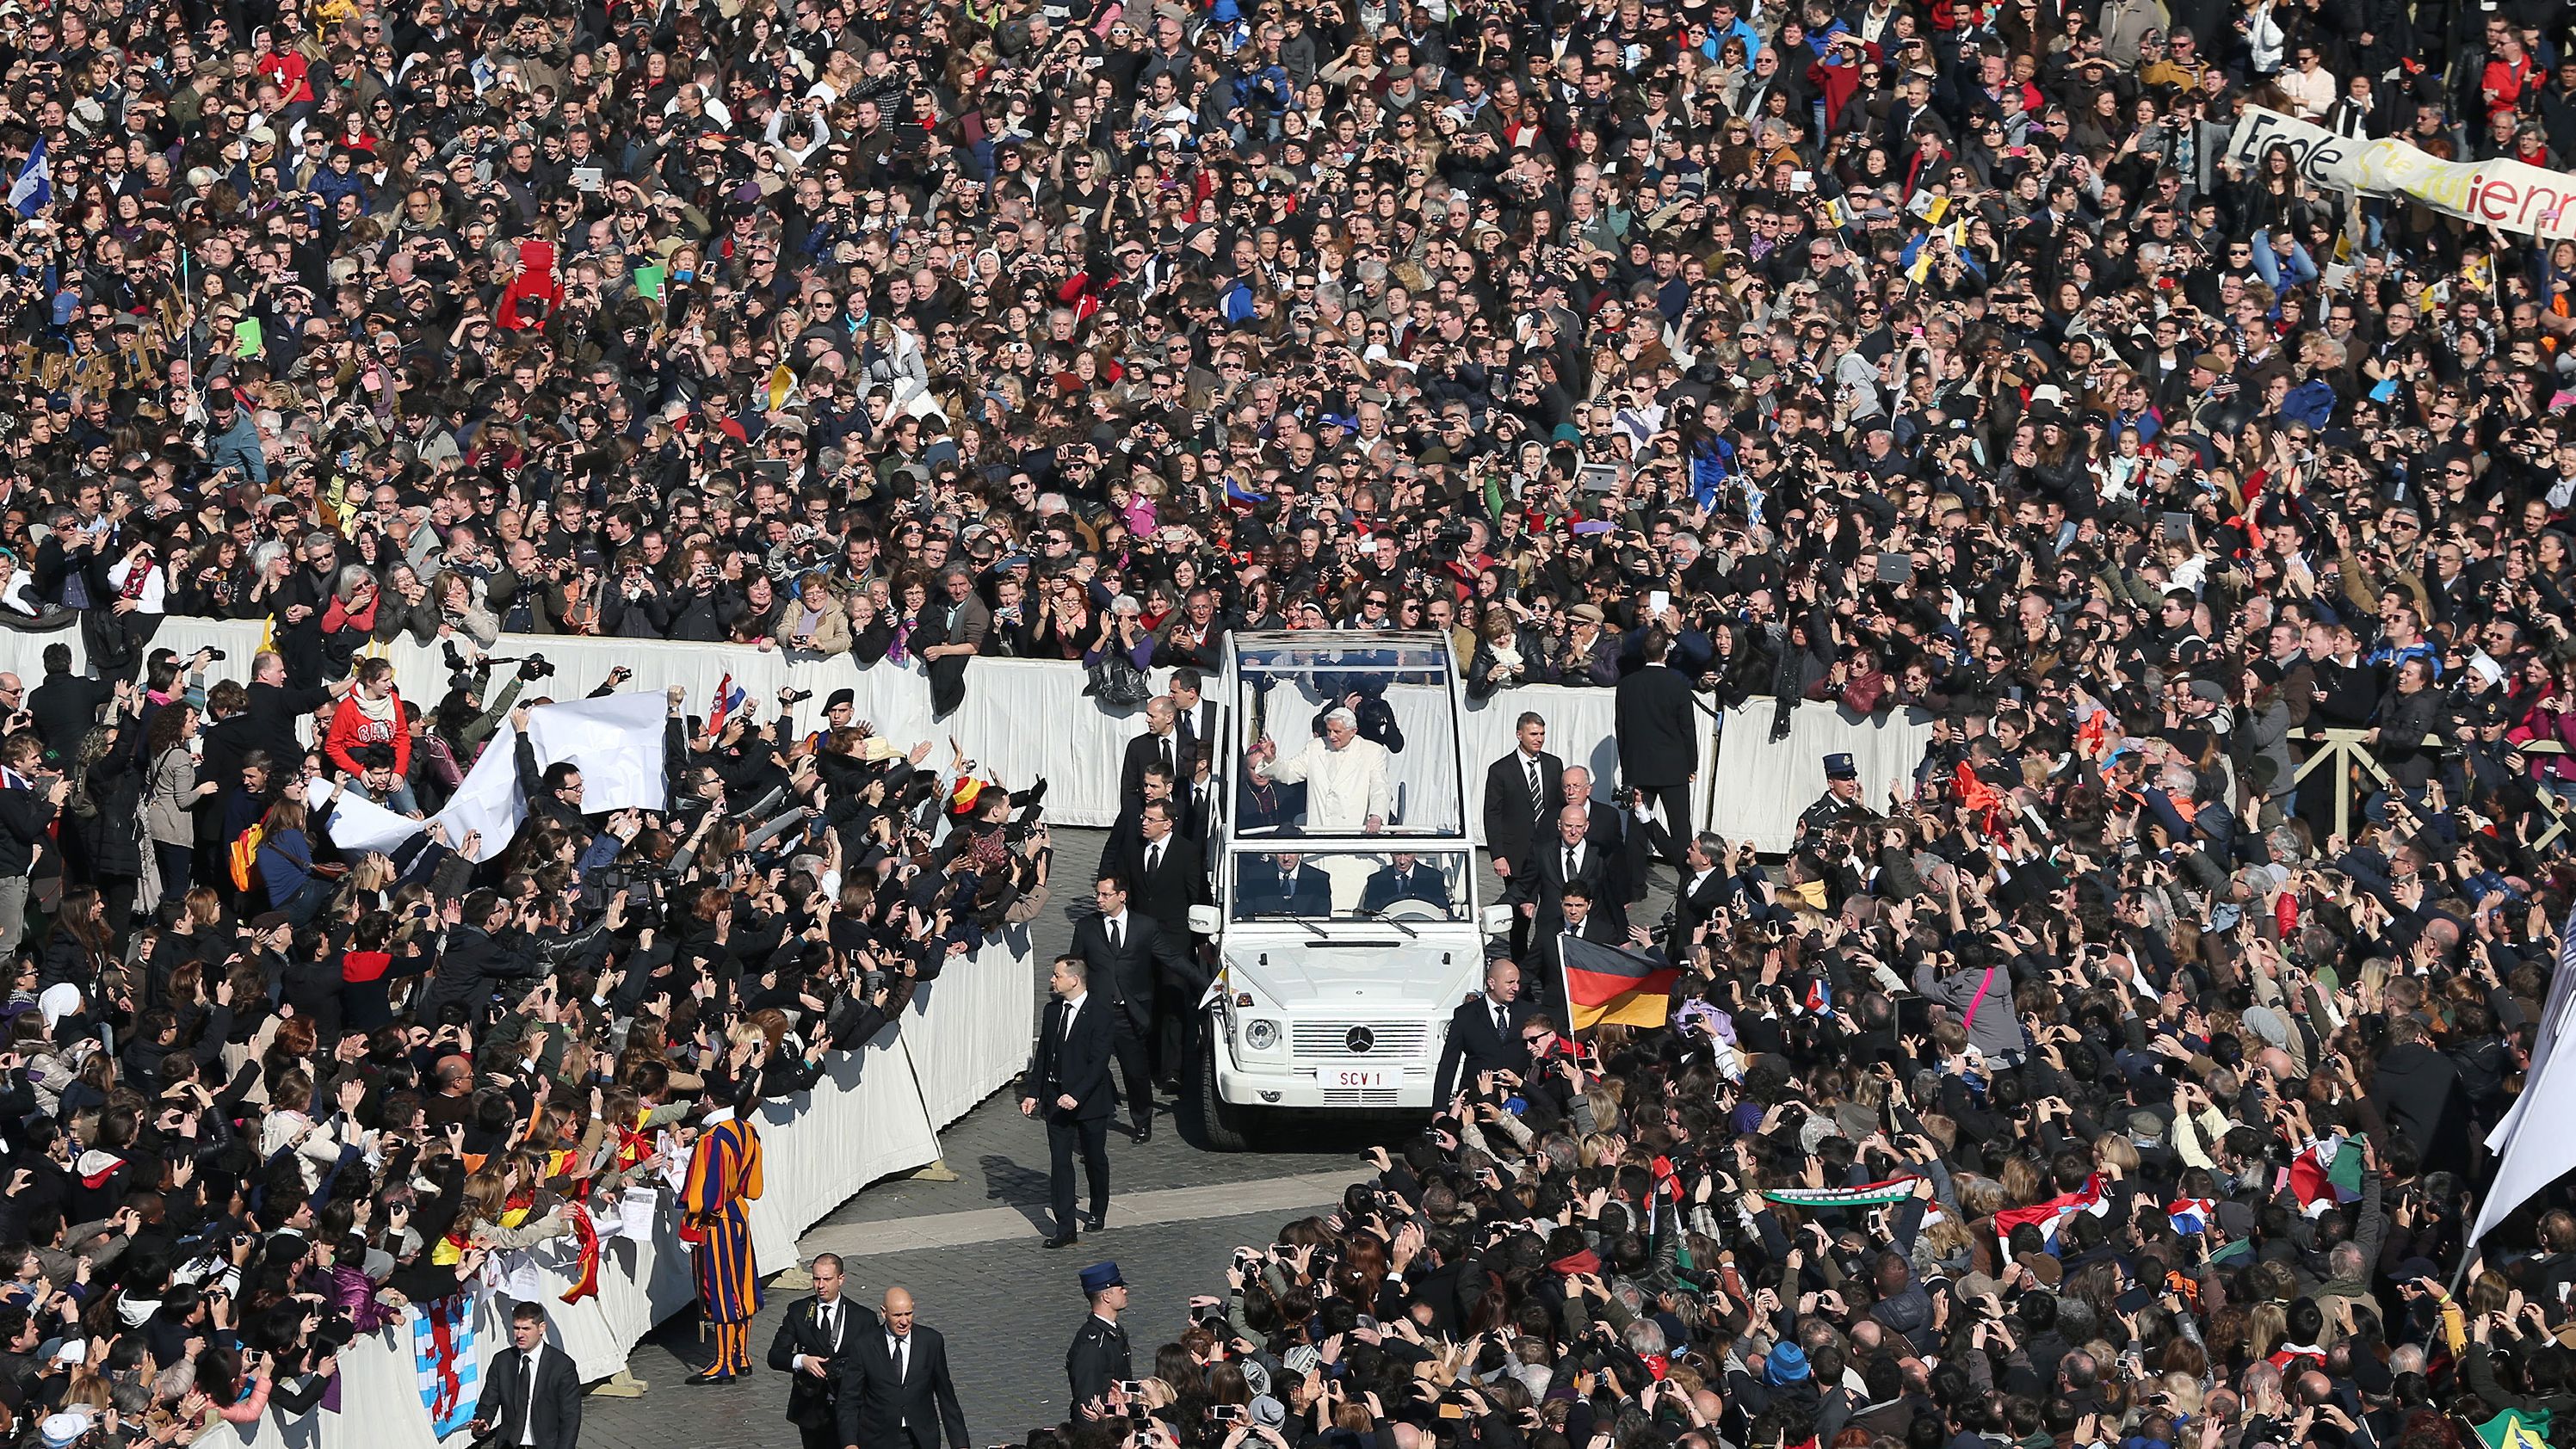 Benedict rides the "popemobile" to St. Peter's Square in February 2013. Earlier that month, he announced that he would be retiring. The 85-year-old cited his "advanced age" as the reason.